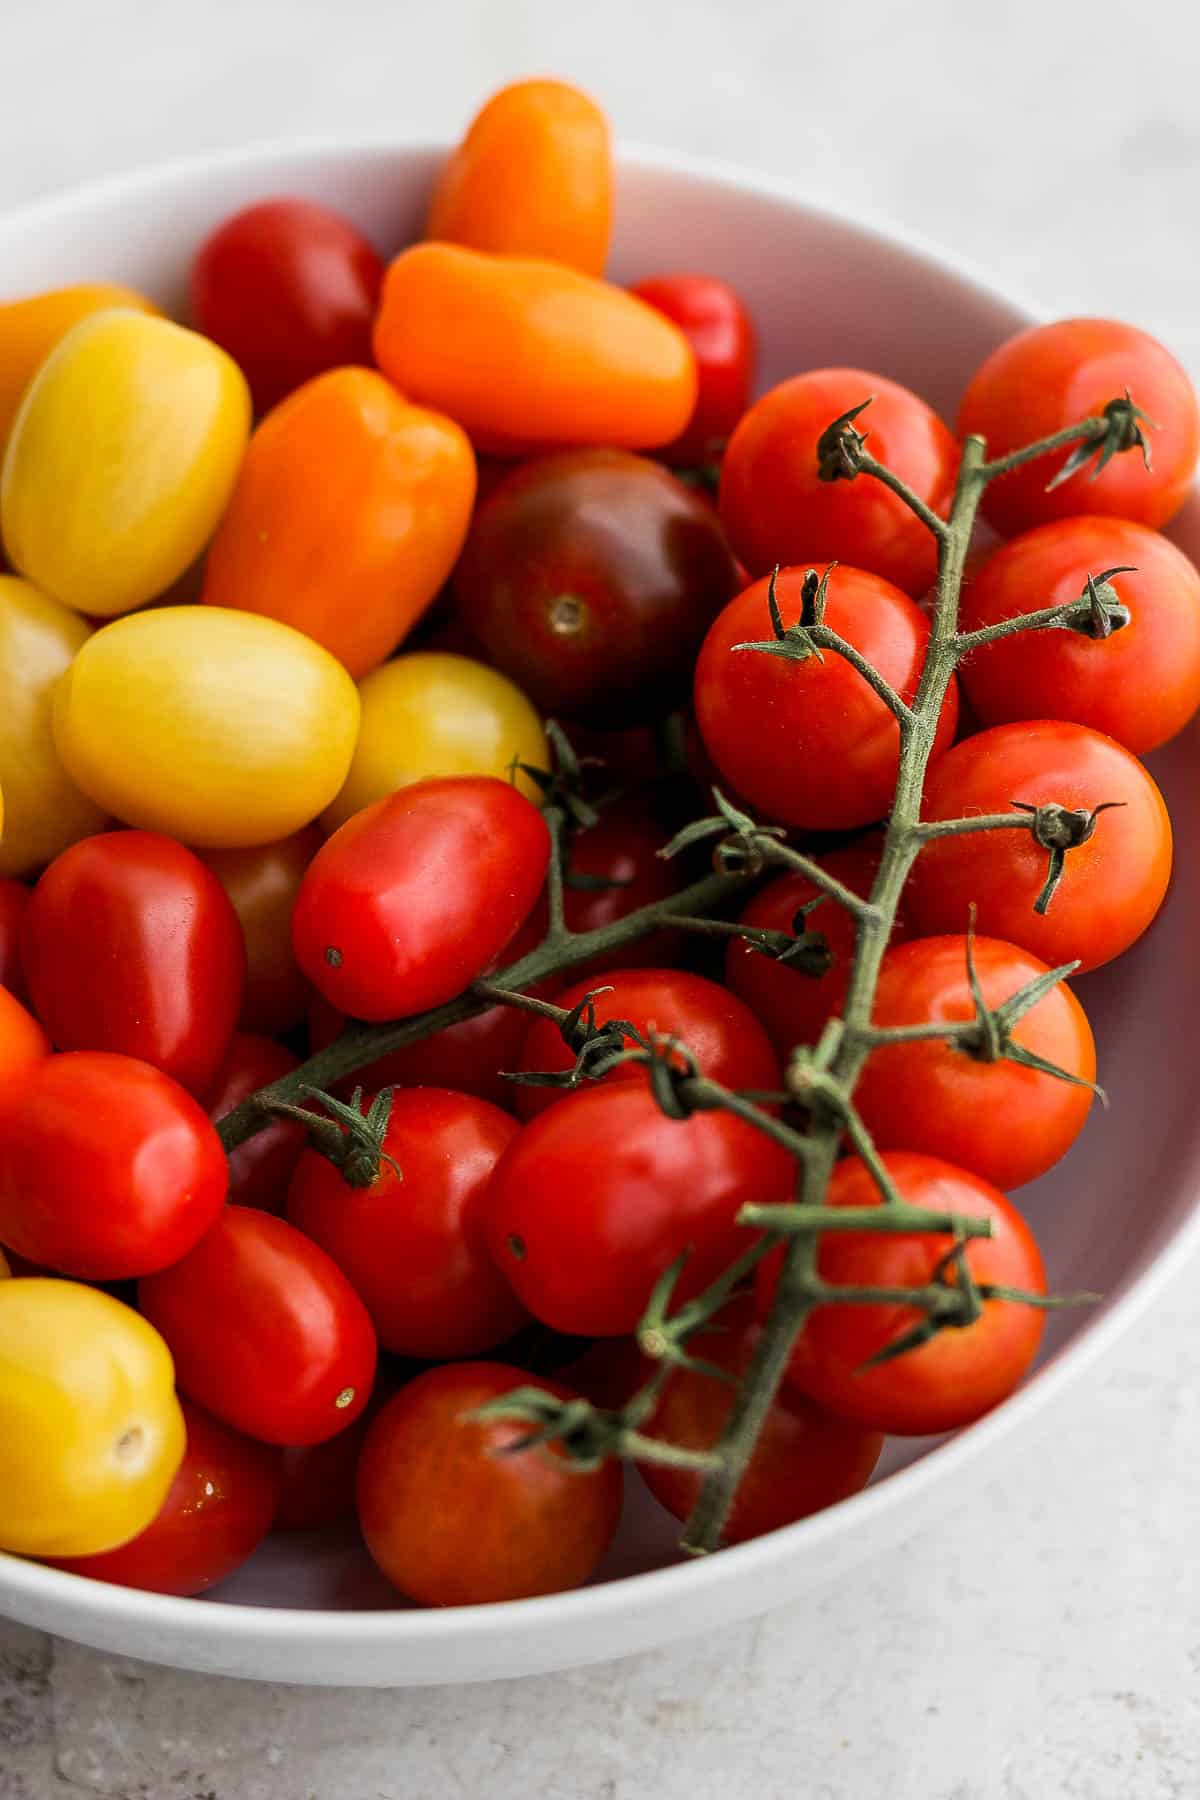 A bowl of cherry tomatoes.